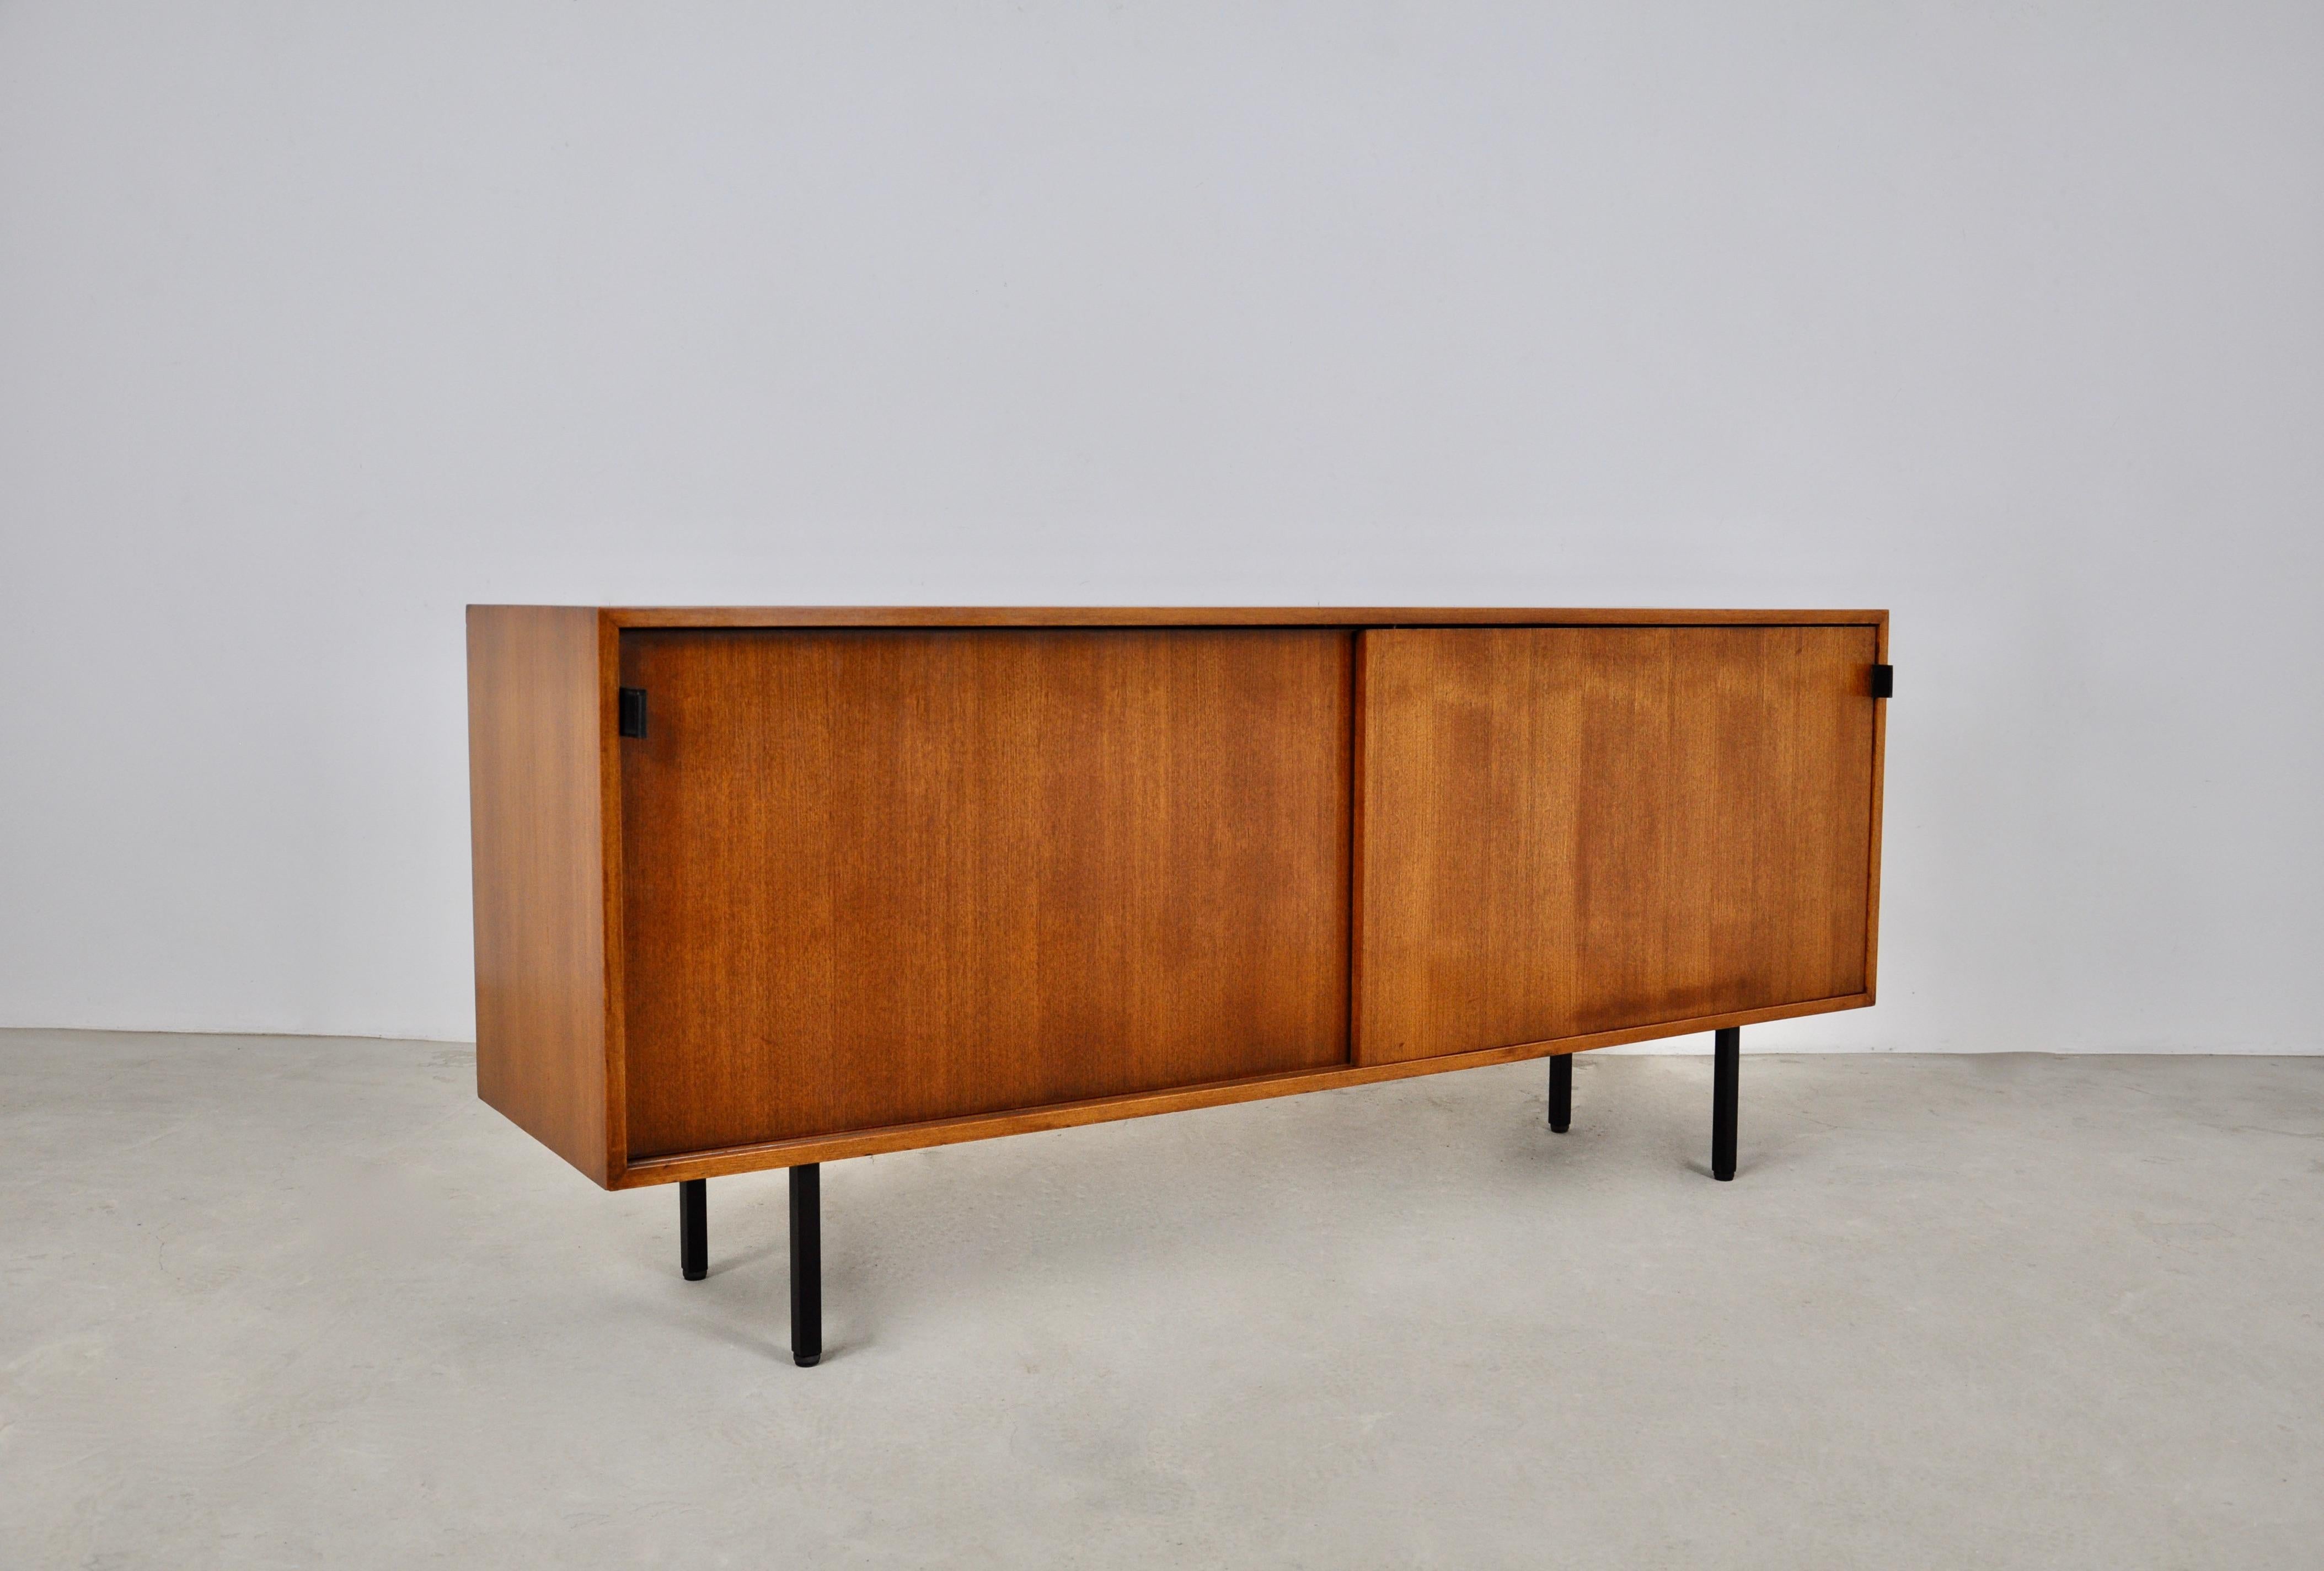 sideboard in wood and with metal legs. The door handles are in leather. It has 2 sliding doors, each containing two shelves. Wear due to time and age of the sideboard